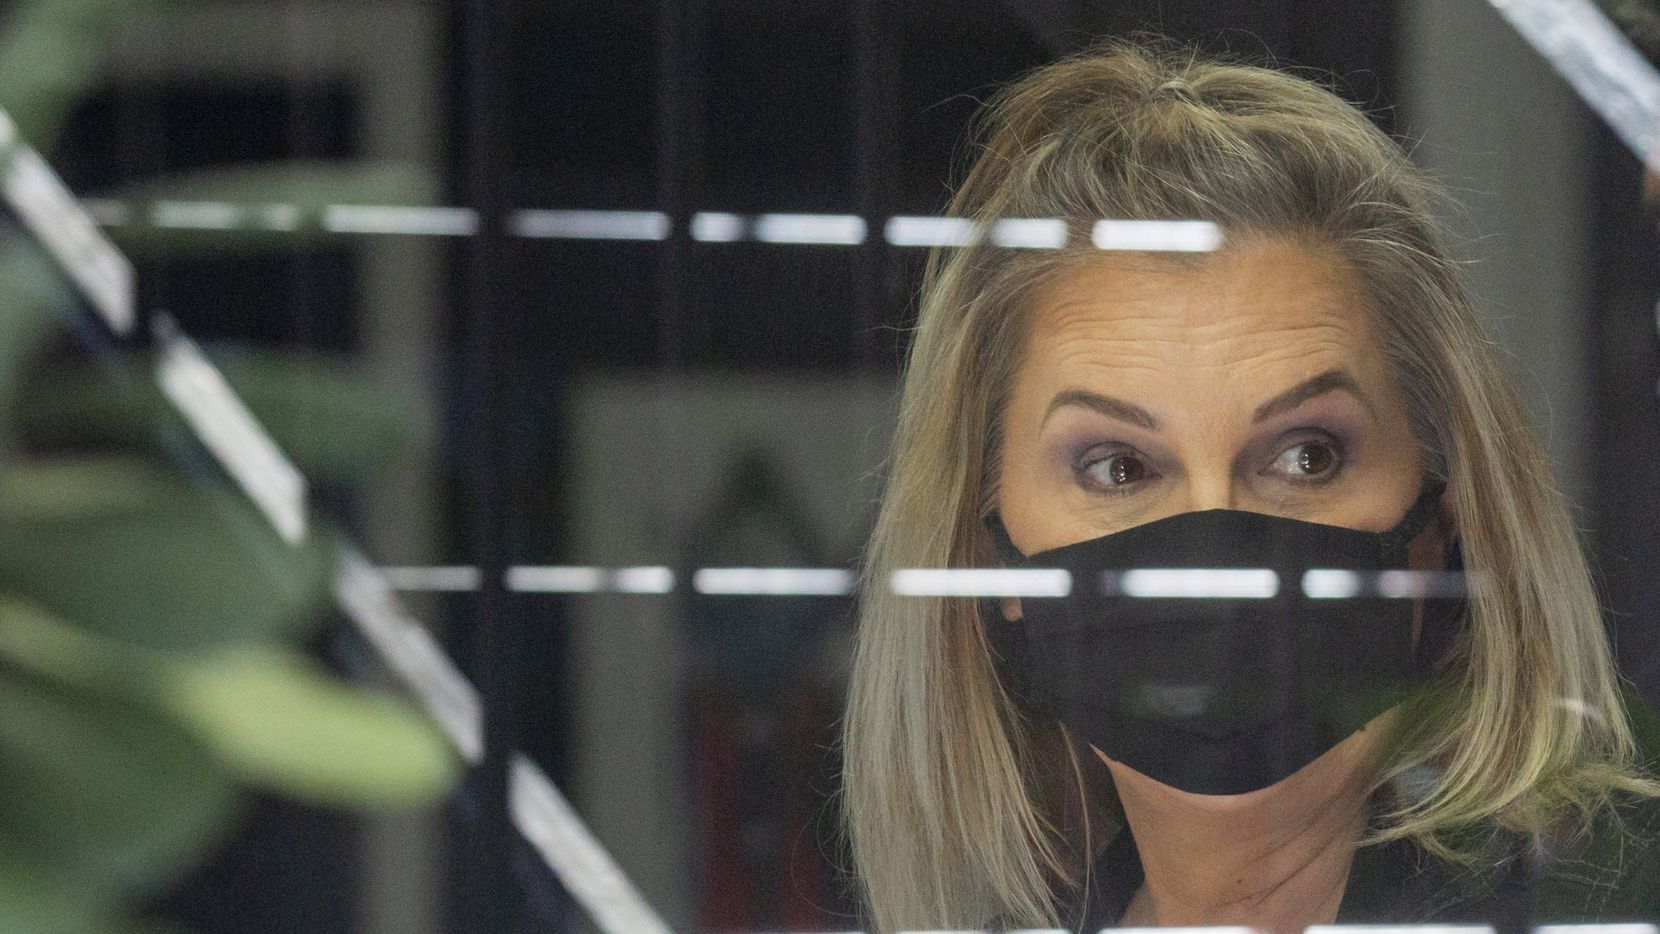 Dallas salon owner Shelley Luther was fined and sentenced to seven days in jail for violating an order to close her business amid the coronavirus. Her case has incensed many conservatives in Congress and beyond. (Lynda M. Gonzalez/The Dallas Morning News)